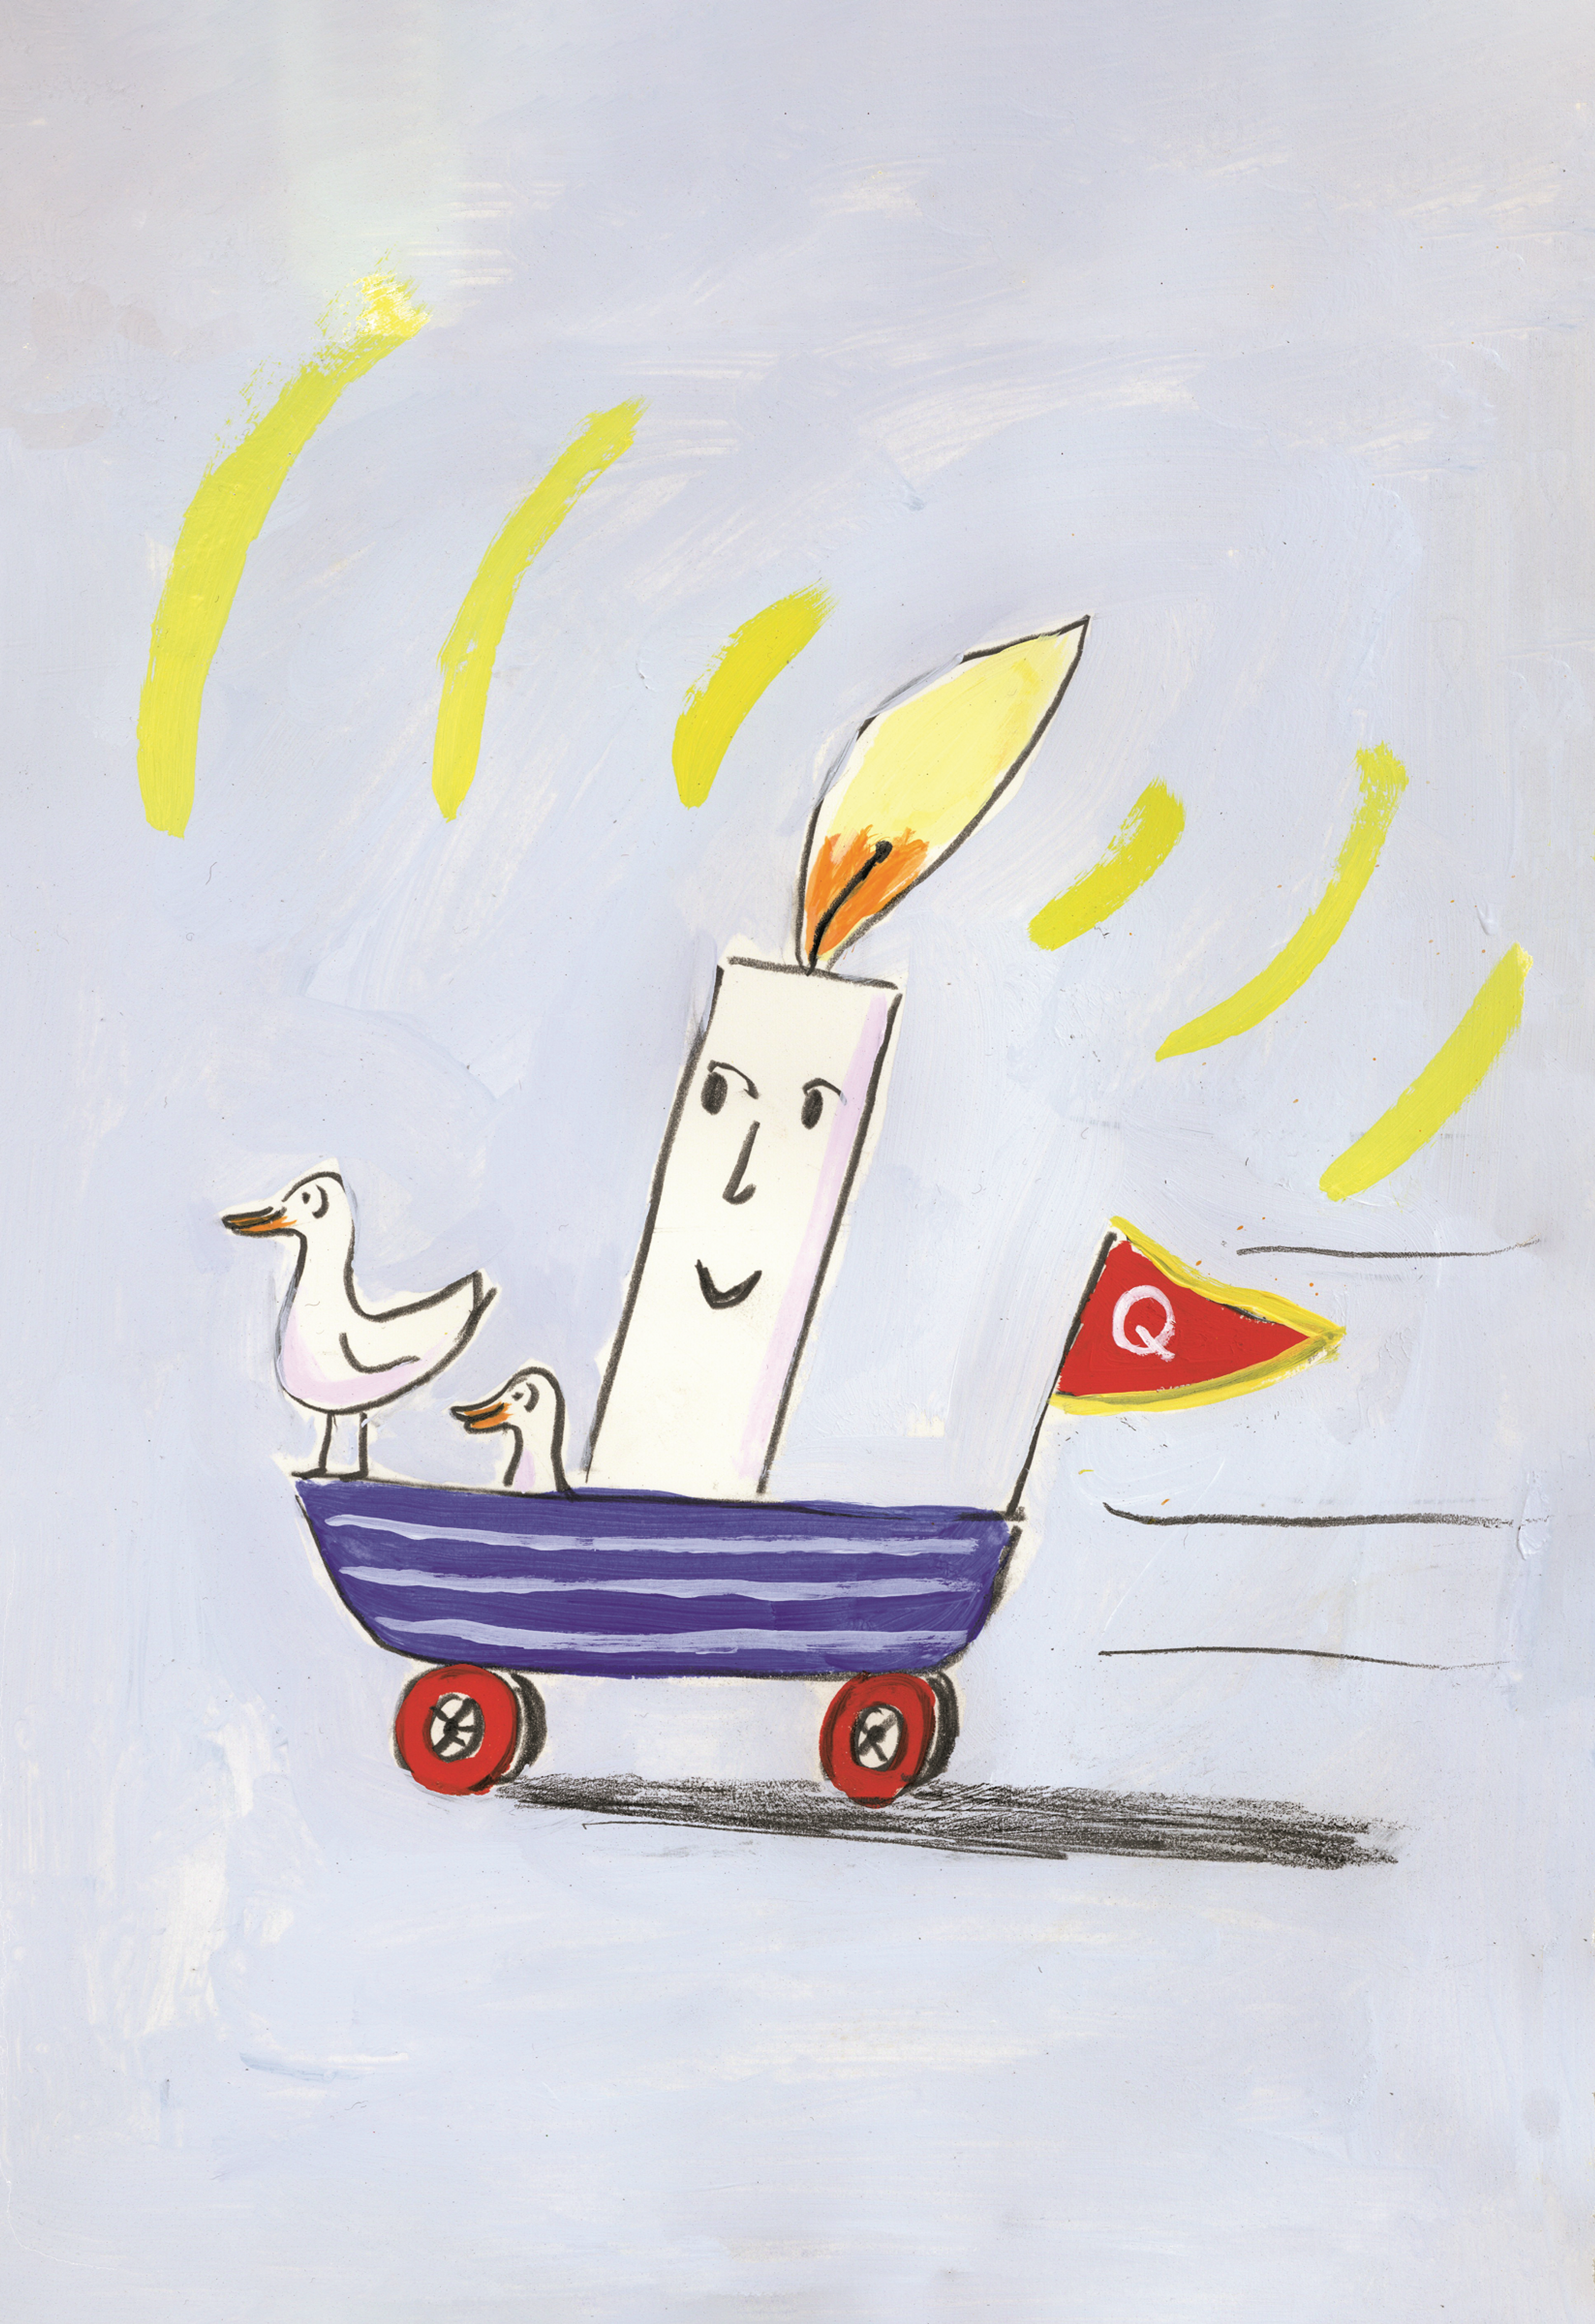 Illustration of a candle and two ducks in a boat on wheels